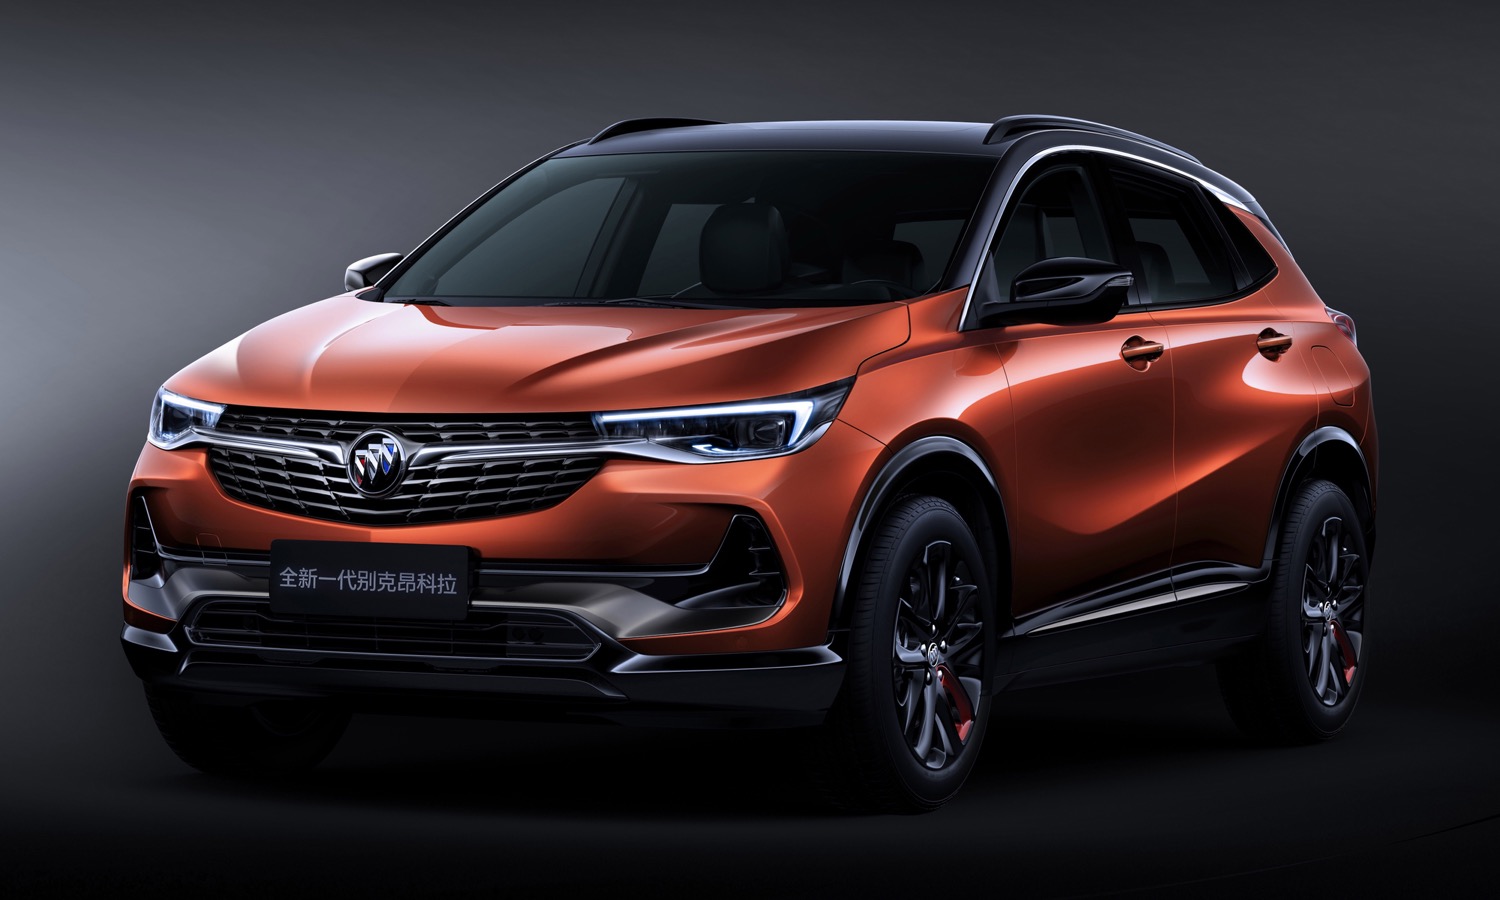 GM Officially Reveals 2020 Buick Encore, Encore GX In China | GM Authority